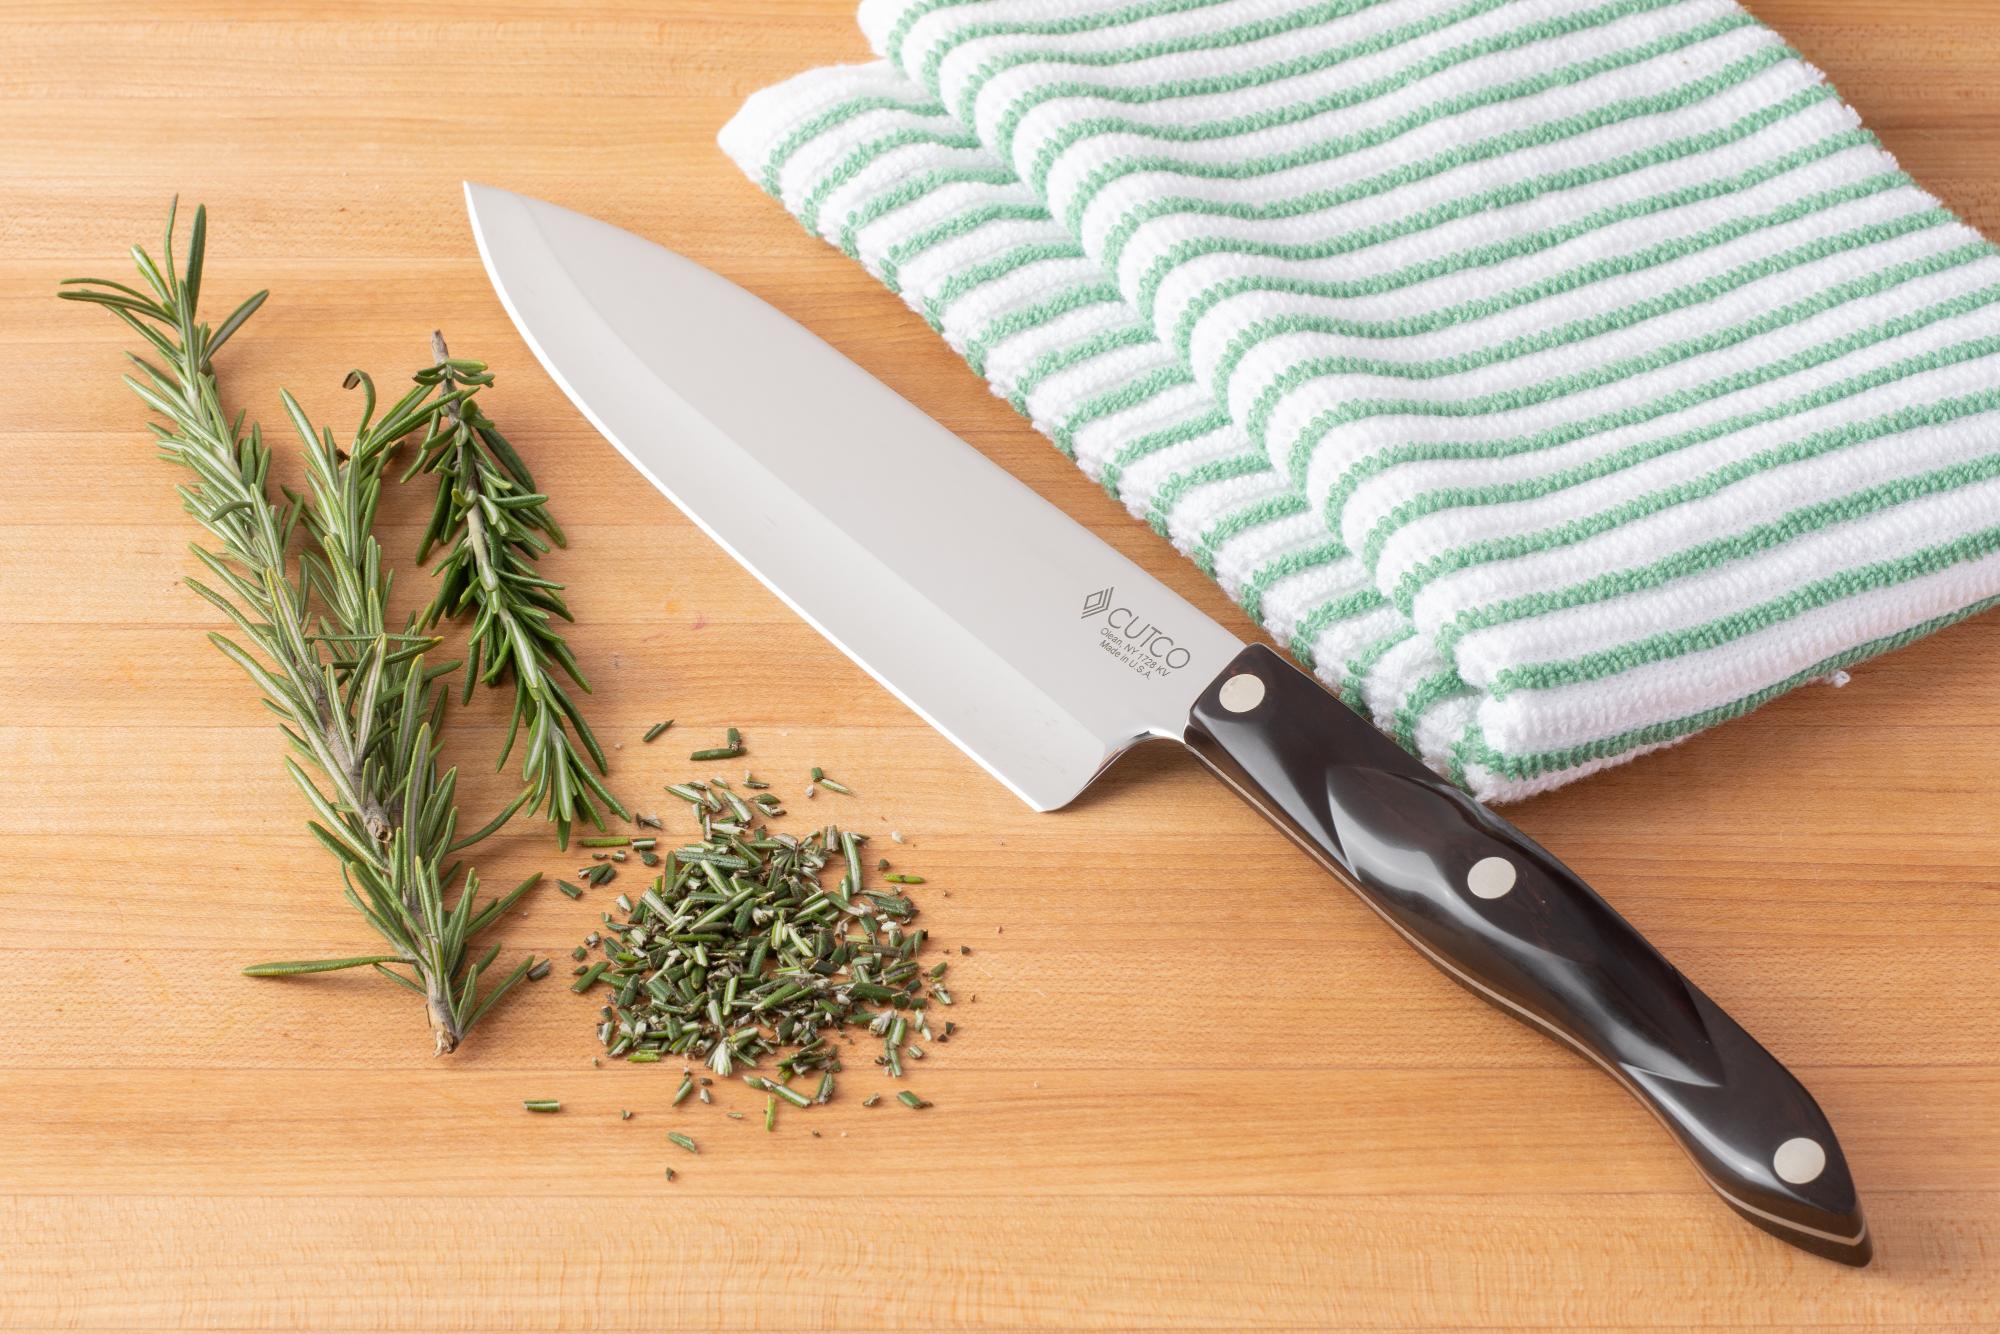 Chopping rosemary with a Petite Chef.